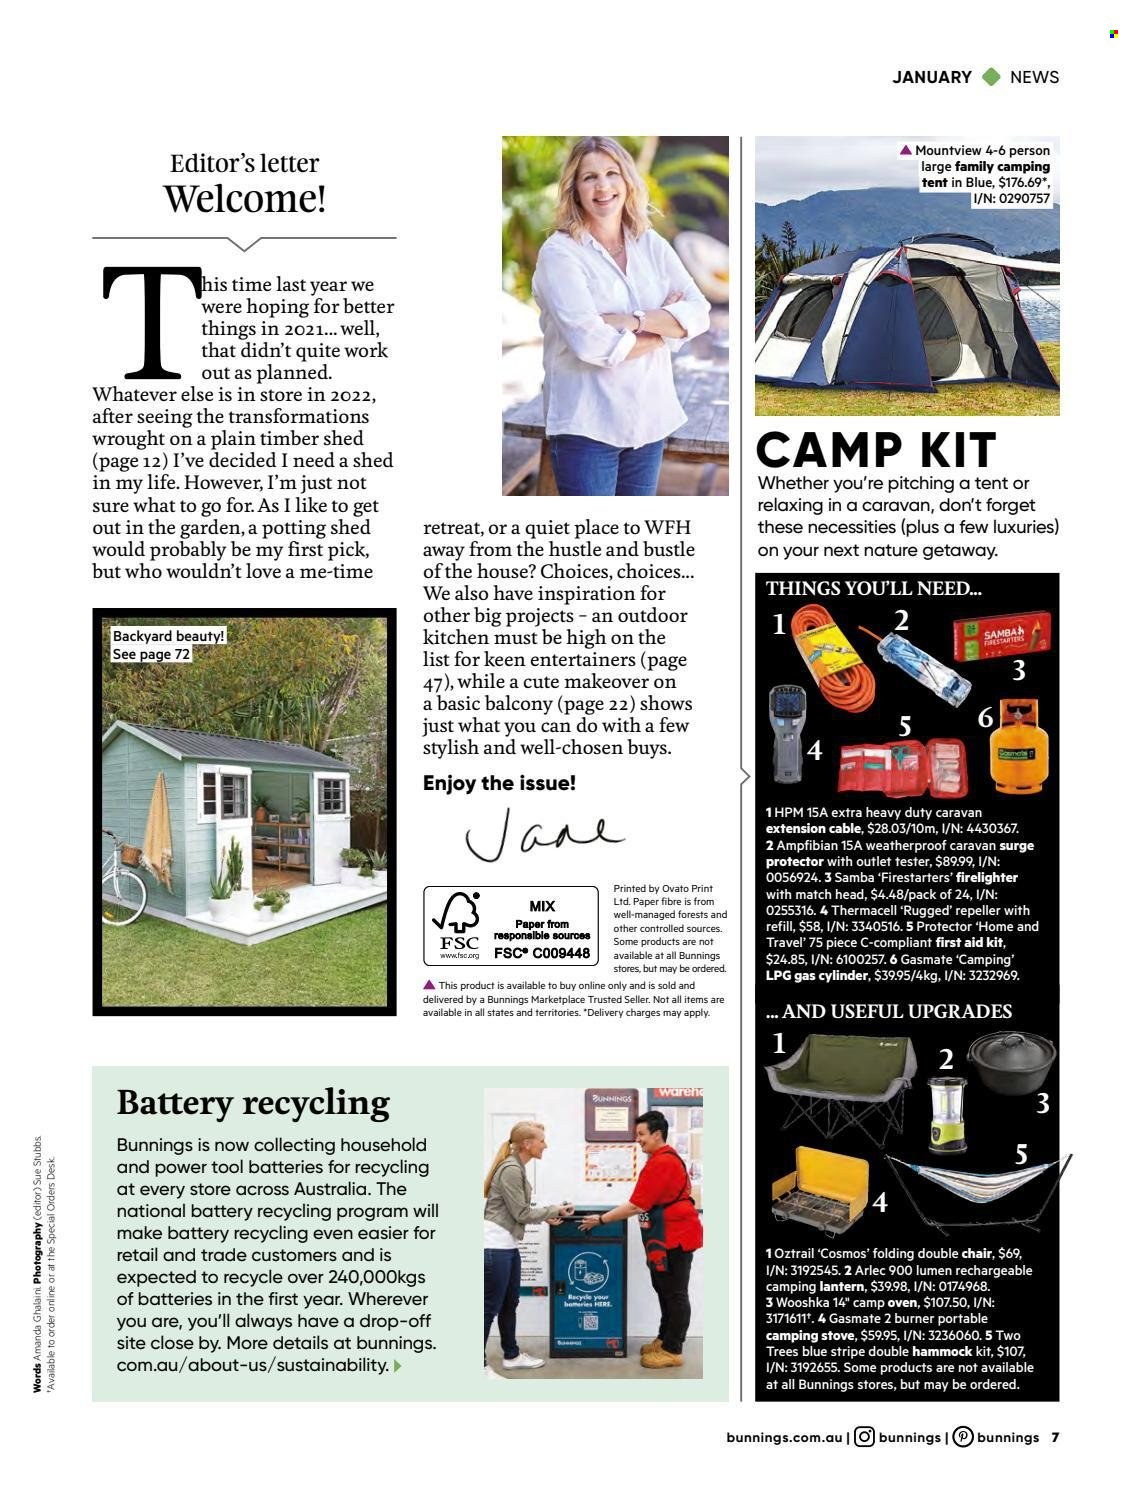 Bunnings Warehouse mailer  - 01.01.2022 - 31.01.2022. Page 7.